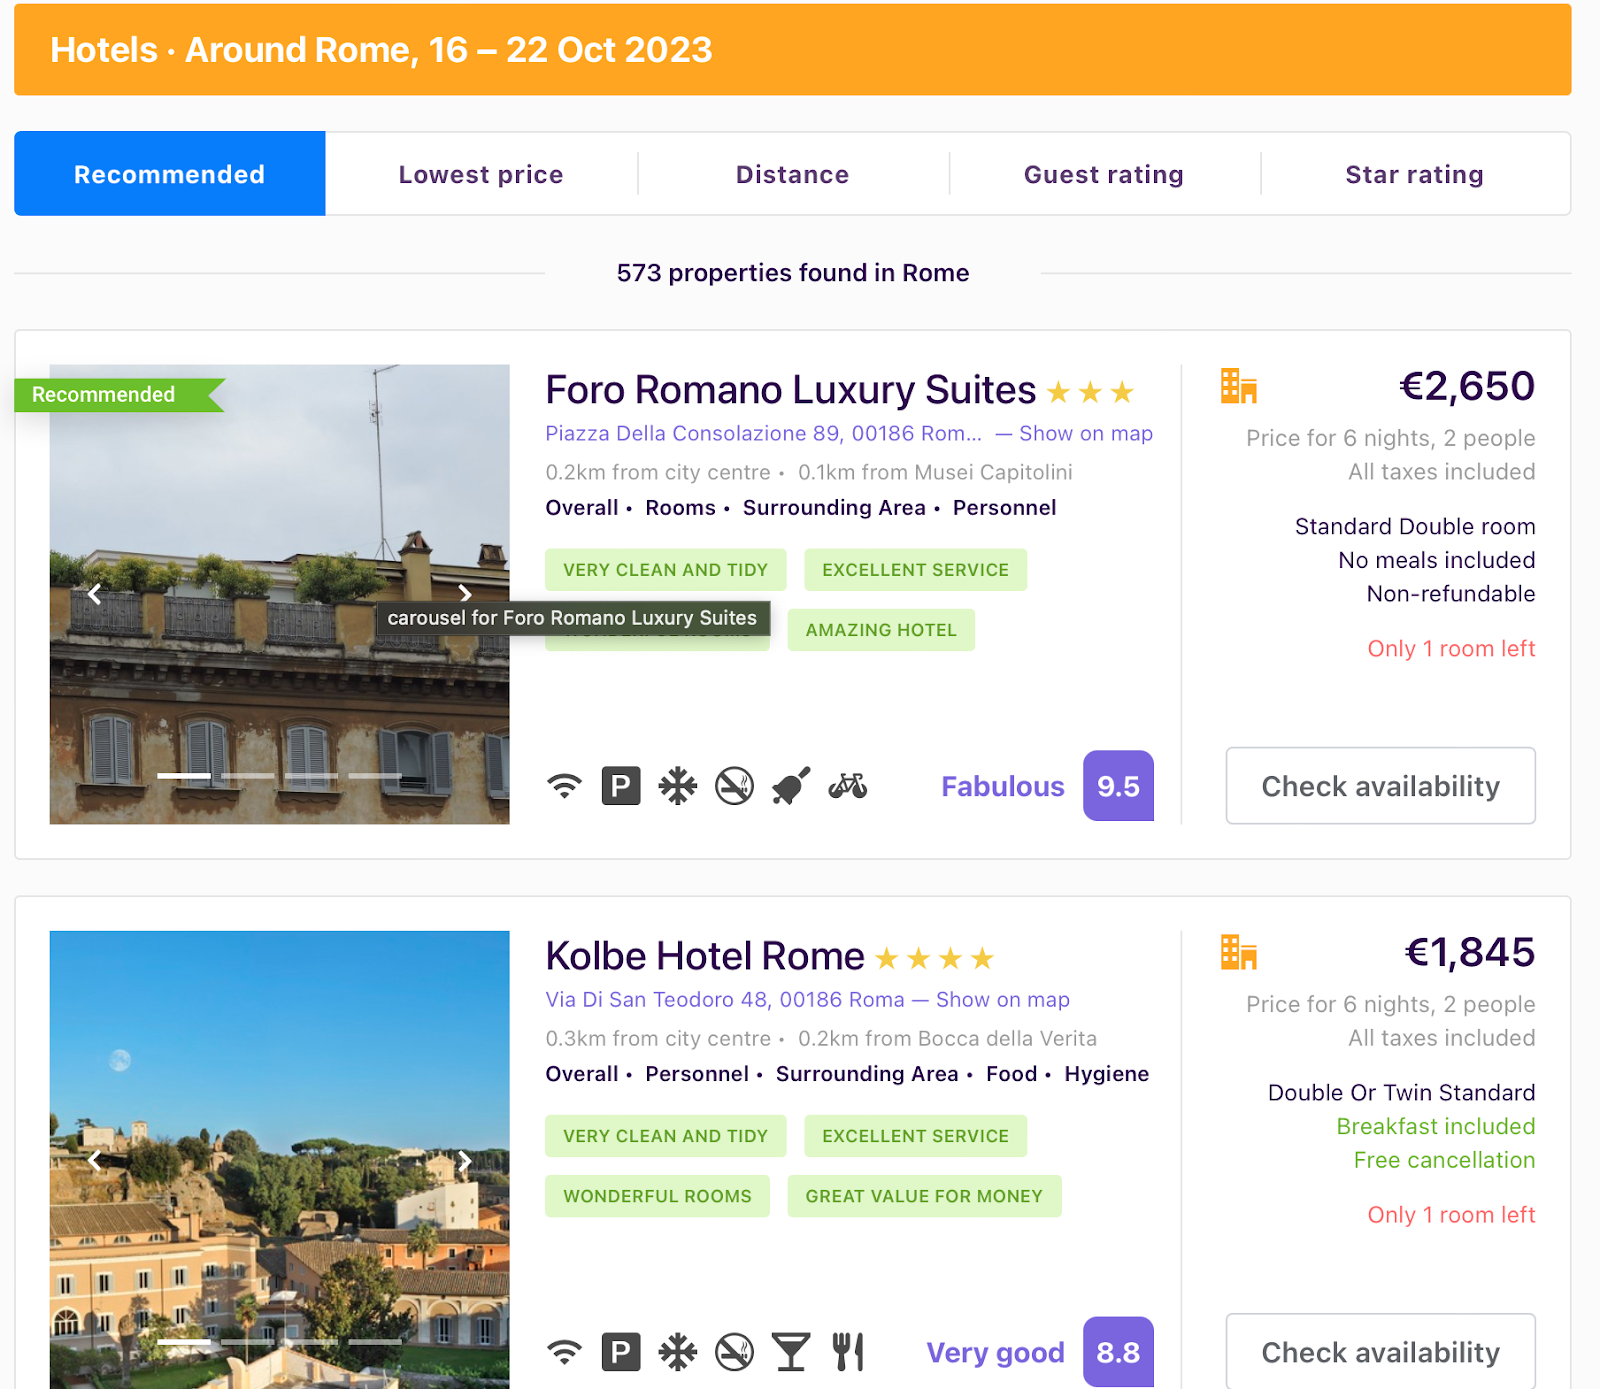 Compare from a wide range of location, accommodation, and price options when booking your stay on Trazler 